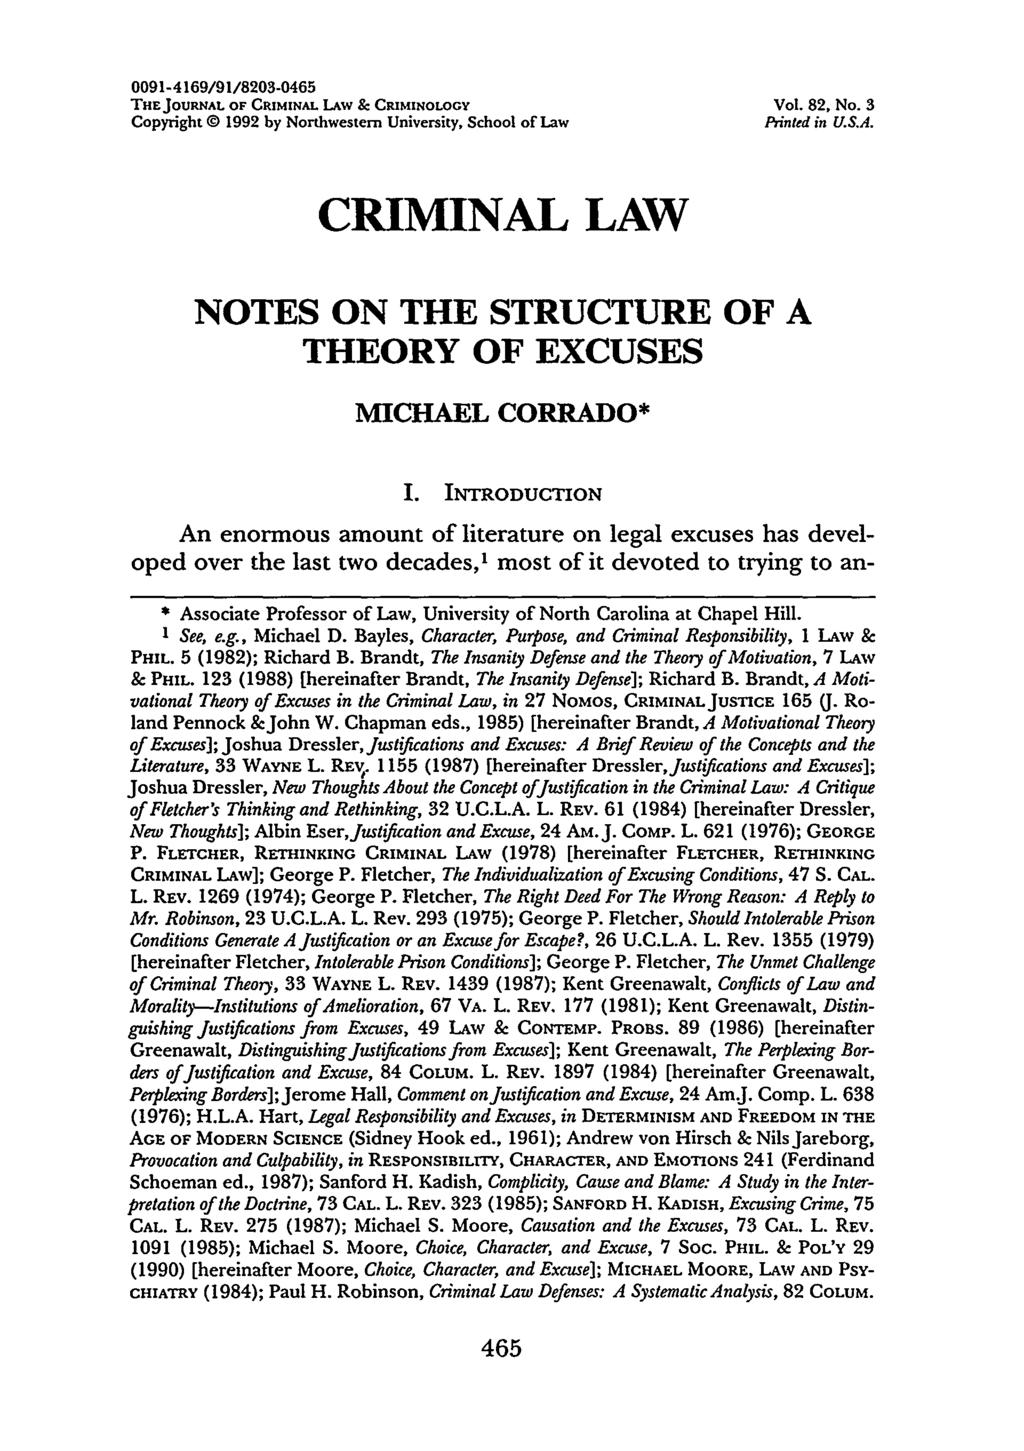 0091-4169/91/8203-0465 THEJOURNAL OF CRIMINAL LAW & CRIMINOLOGY Vol. 82, No. 3 Copyright 0 1992 by Northwestern University, School of Law Pyinted in U.S.A. CRIMINAL LAW NOTES ON THE STRUCTURE OF A THEORY OF EXCUSES MICHAEL CORRADO* I.